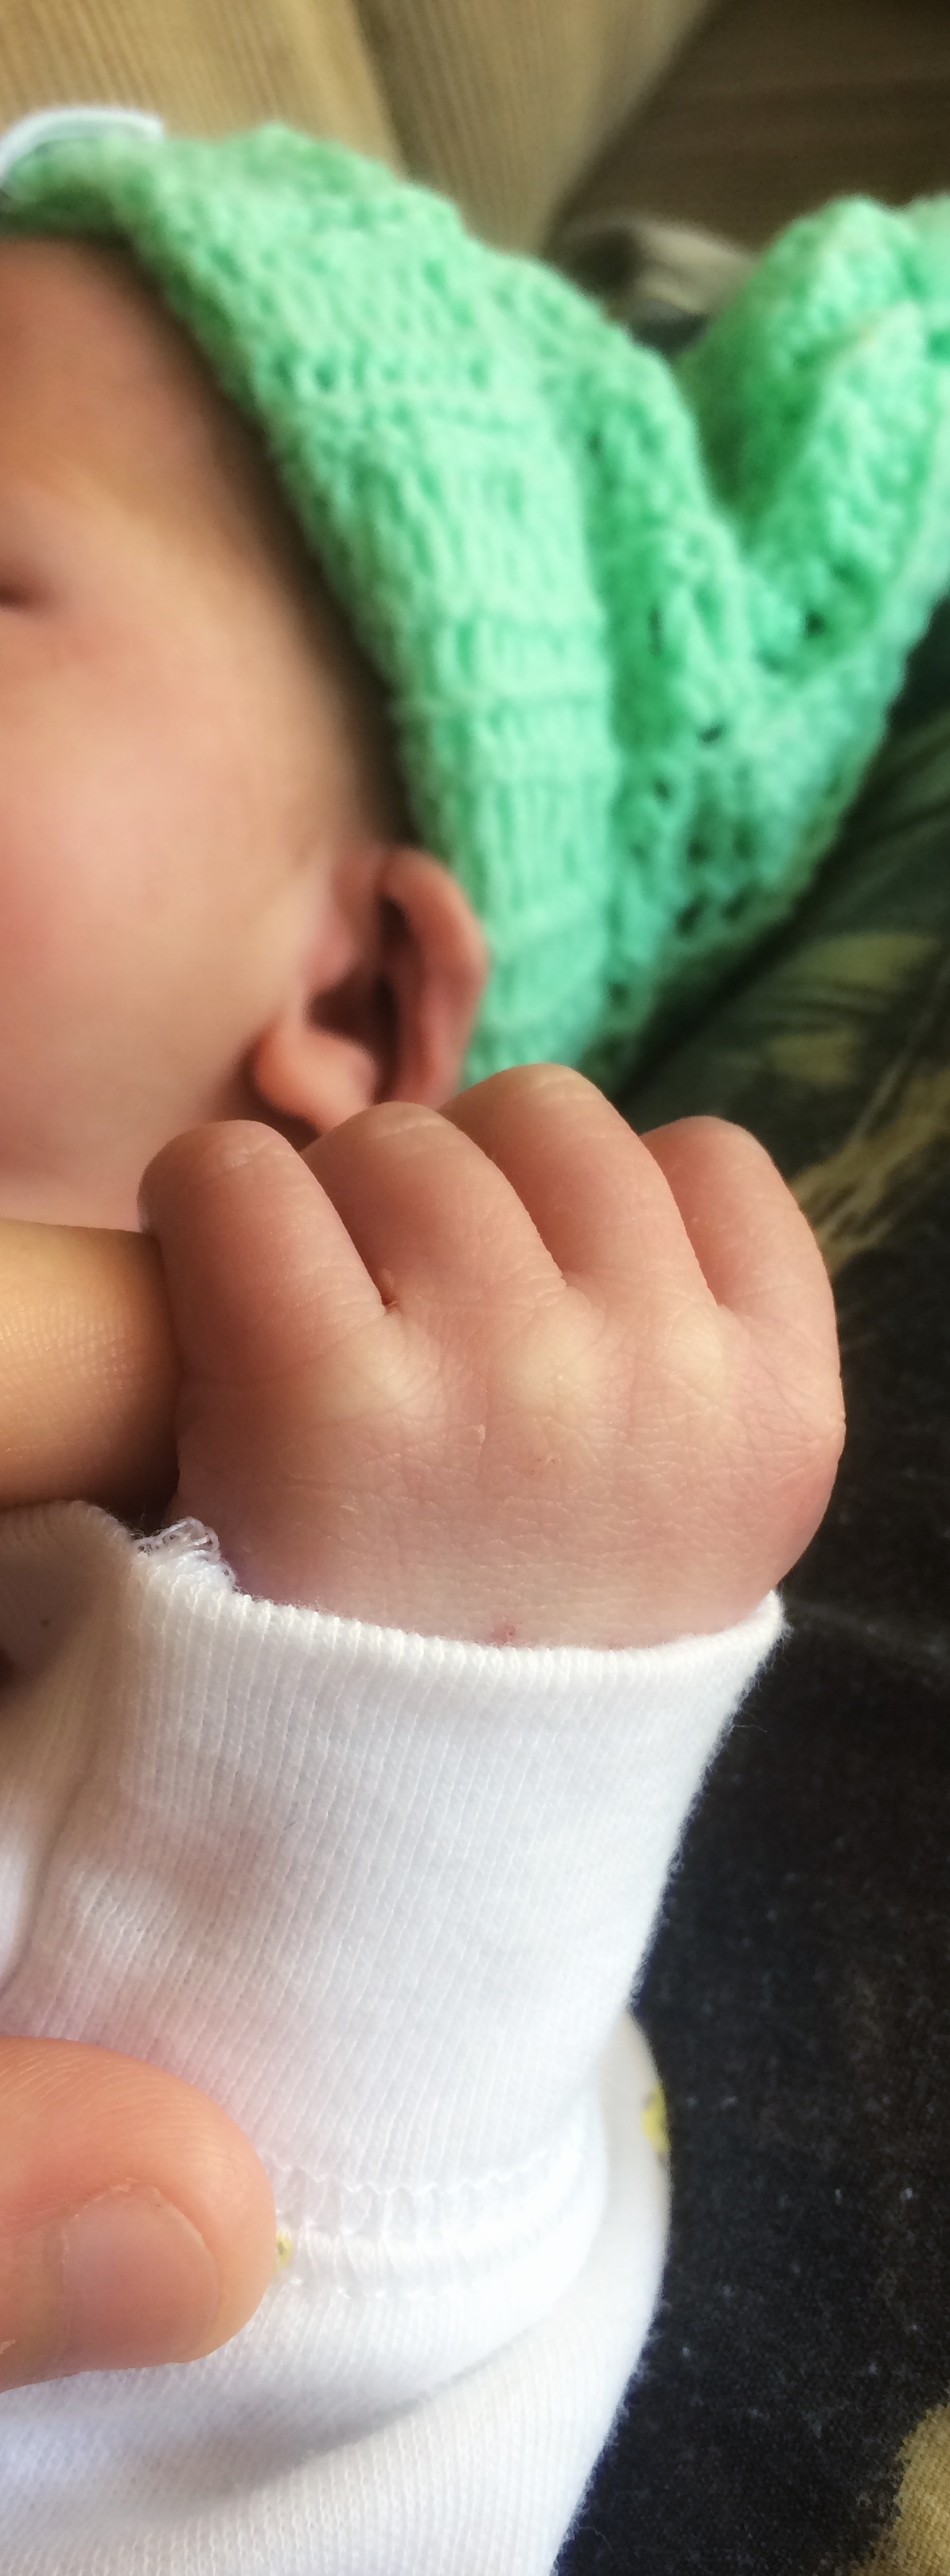 Our Sweet Baby Boy's Birth Story